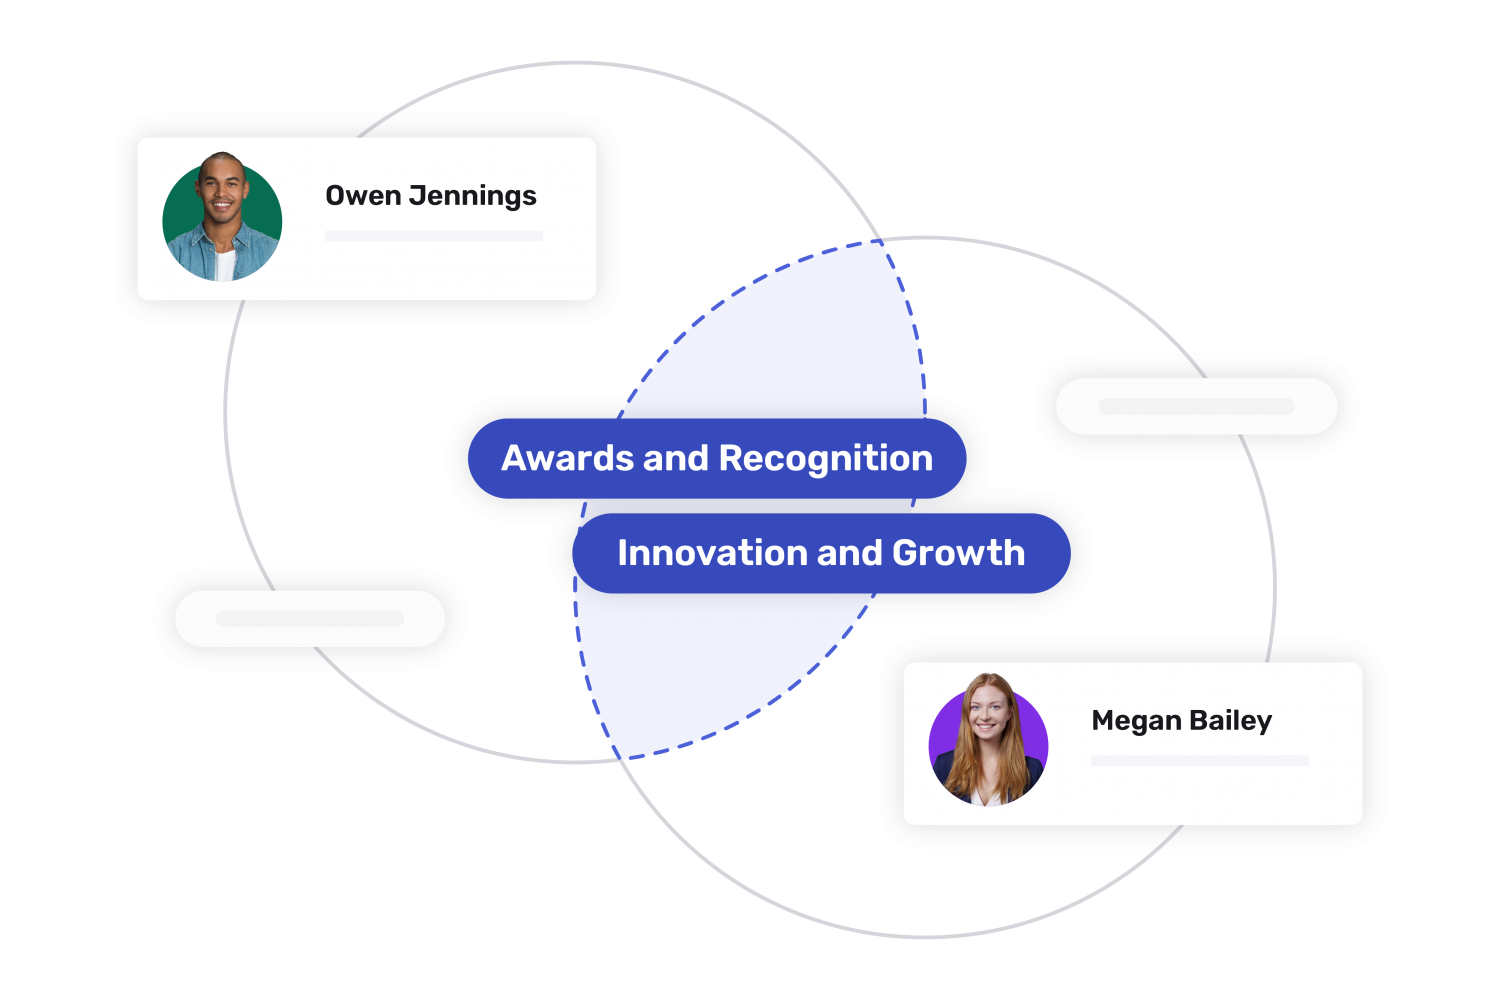 Owen Jennings and Megan Bailey are both interested in Awards and Recognition and Innovation and Growth